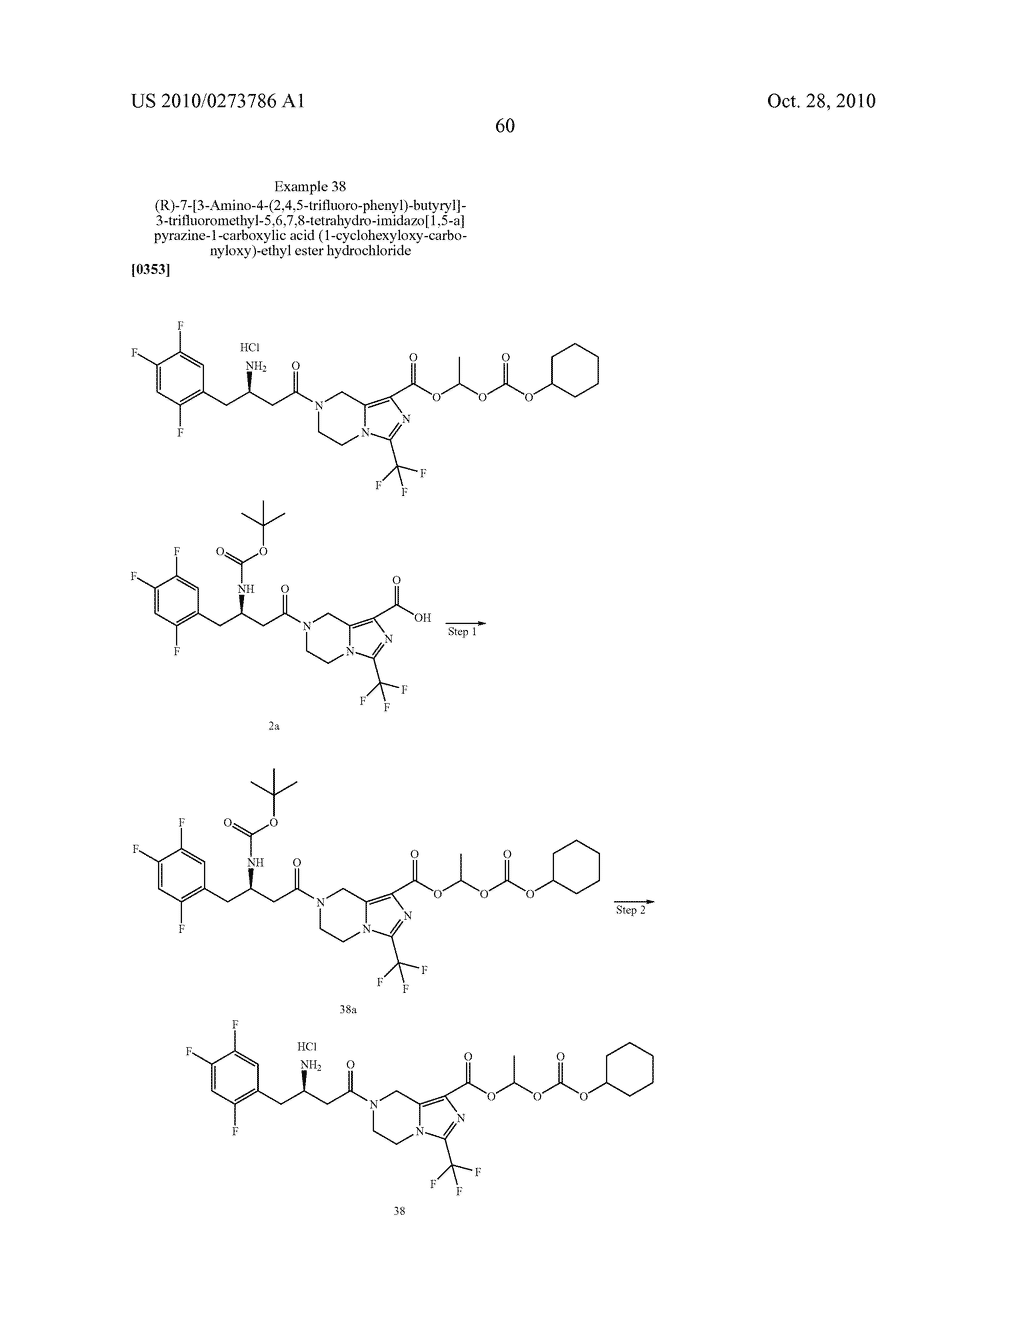 TETRAHYDRO-IMIDAZ0[1,5-A]PYRAZINE DERIVATIVES, PREPARATION PROCESS AND MEDICINAL USE THEREOF - diagram, schematic, and image 61